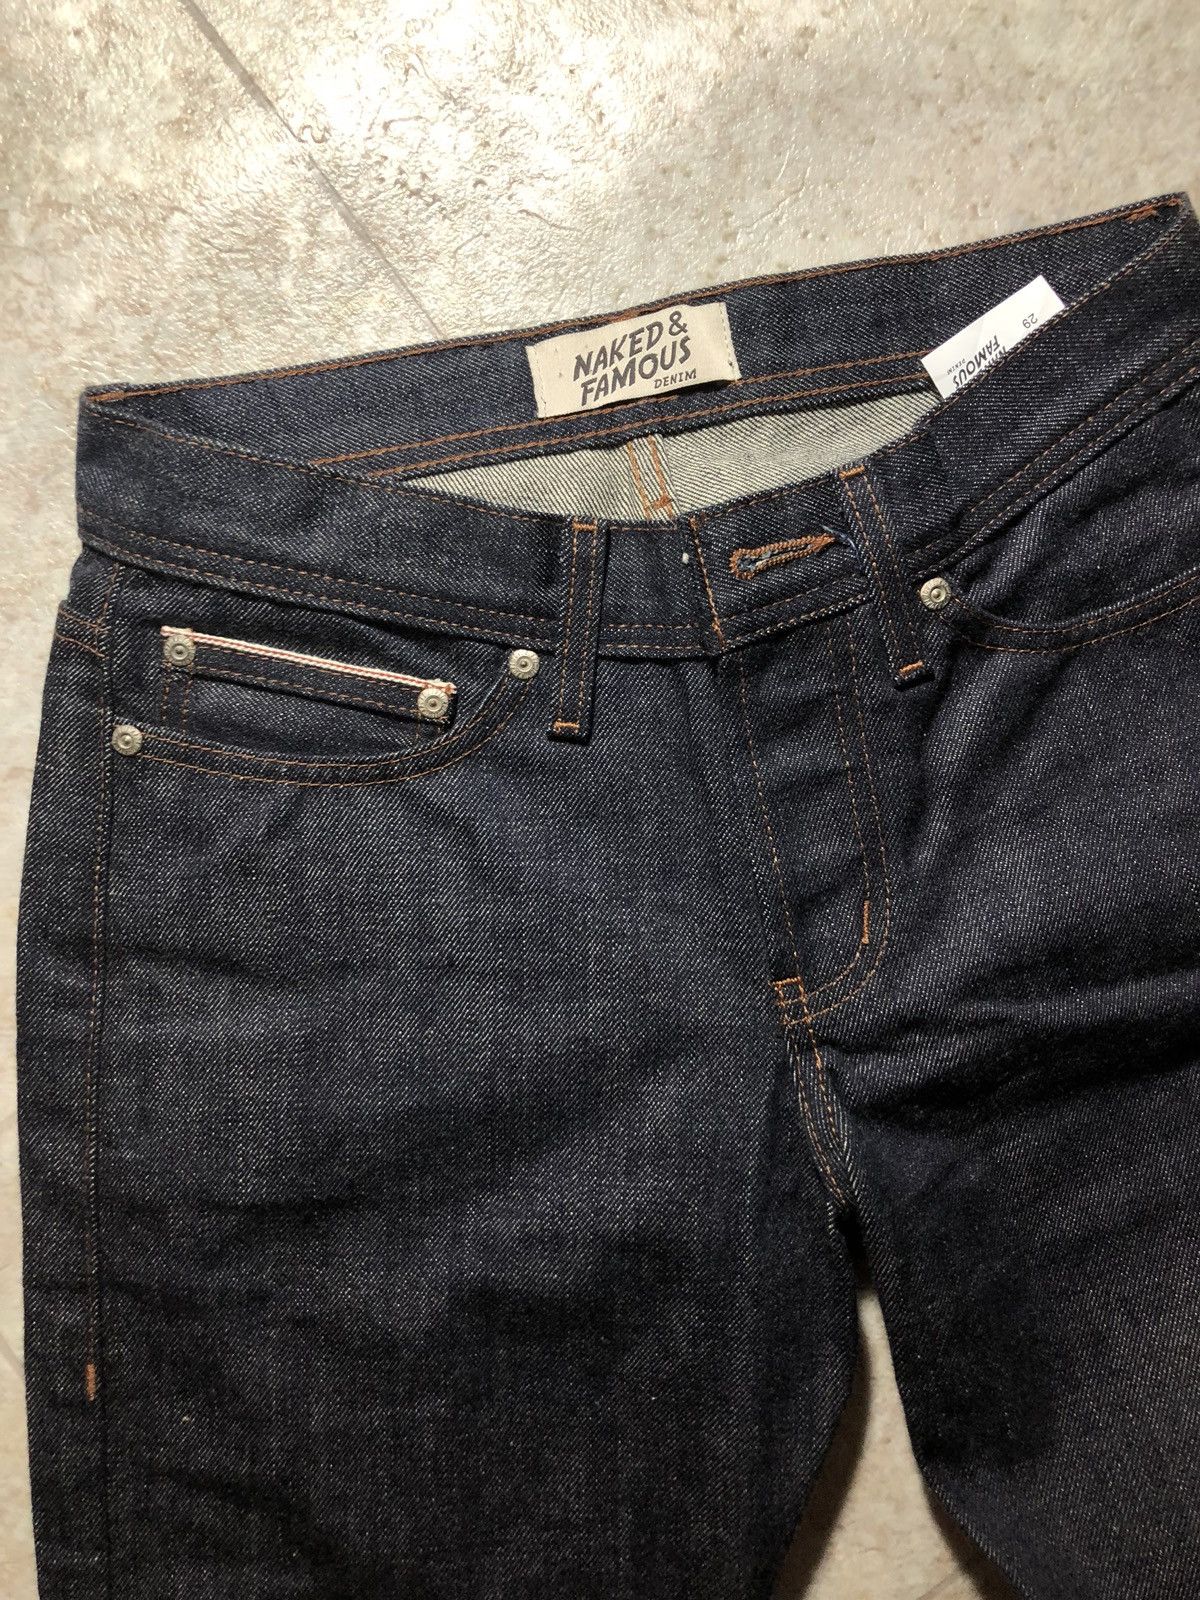 Naked & Famous Salvage Denim | Grailed